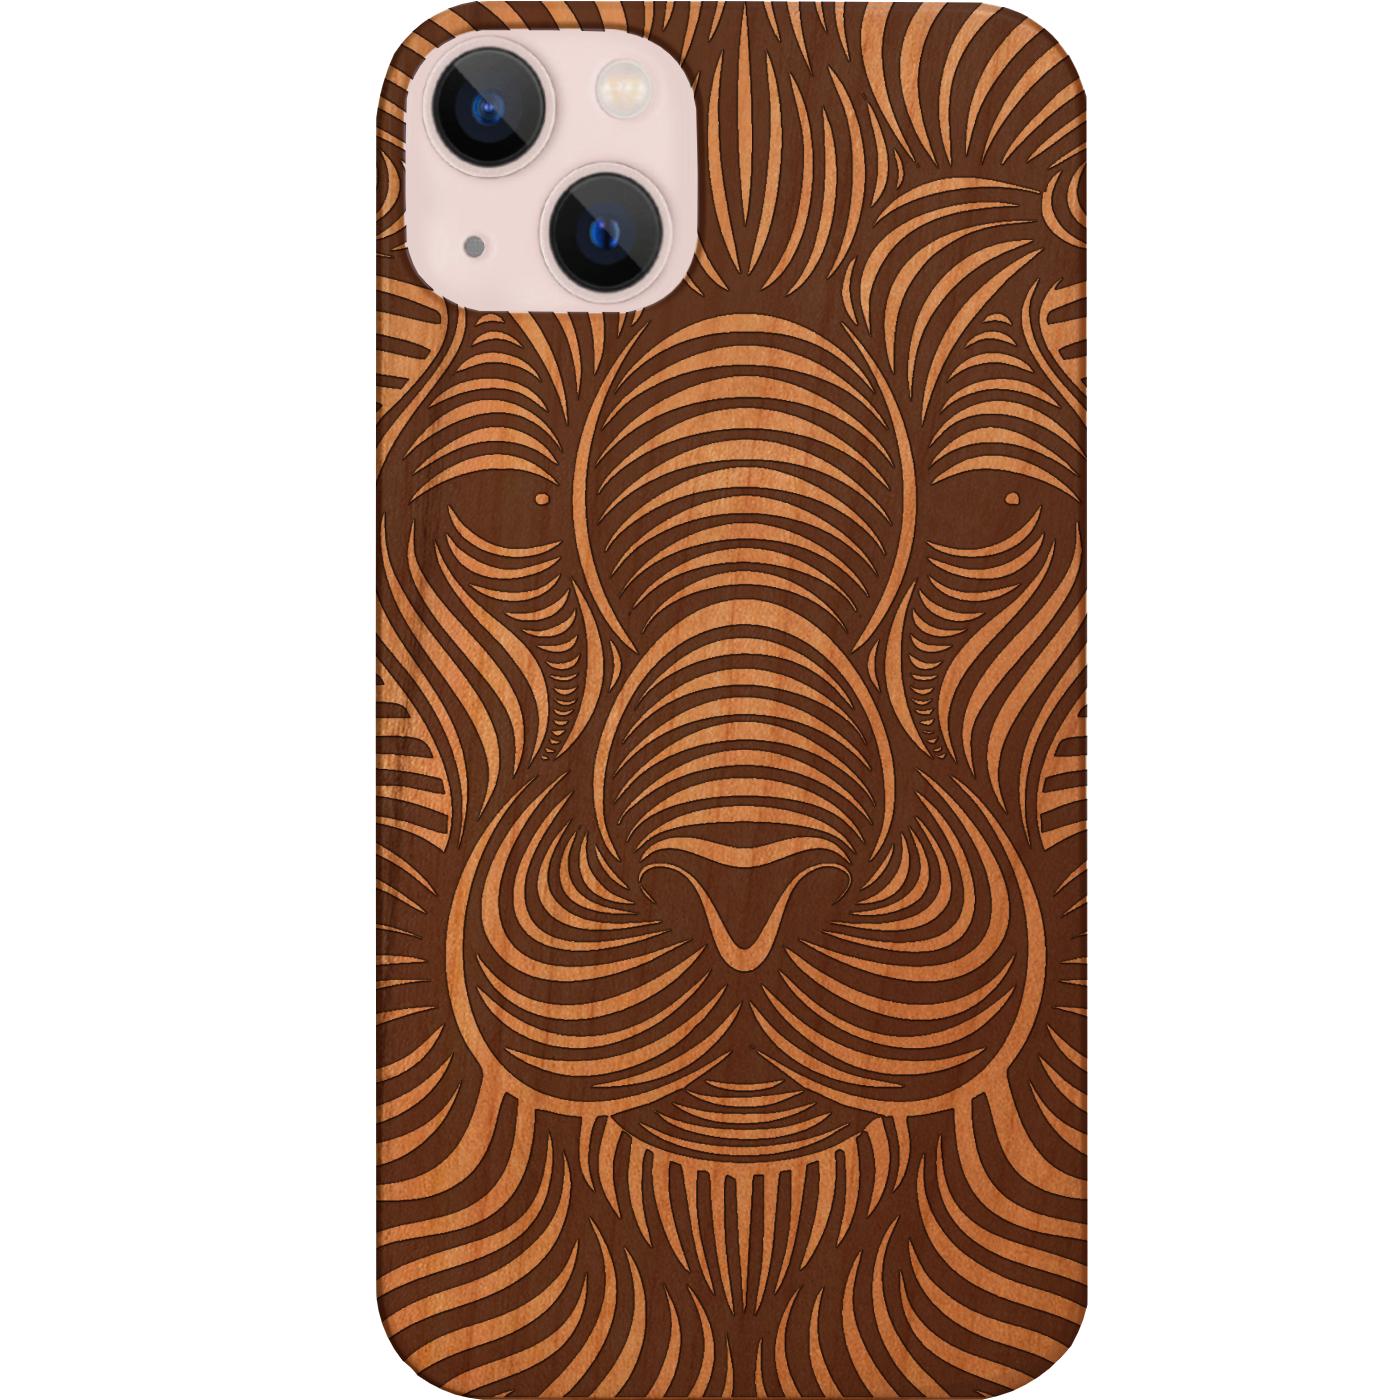 Lion Waves - Engraved Phone Case